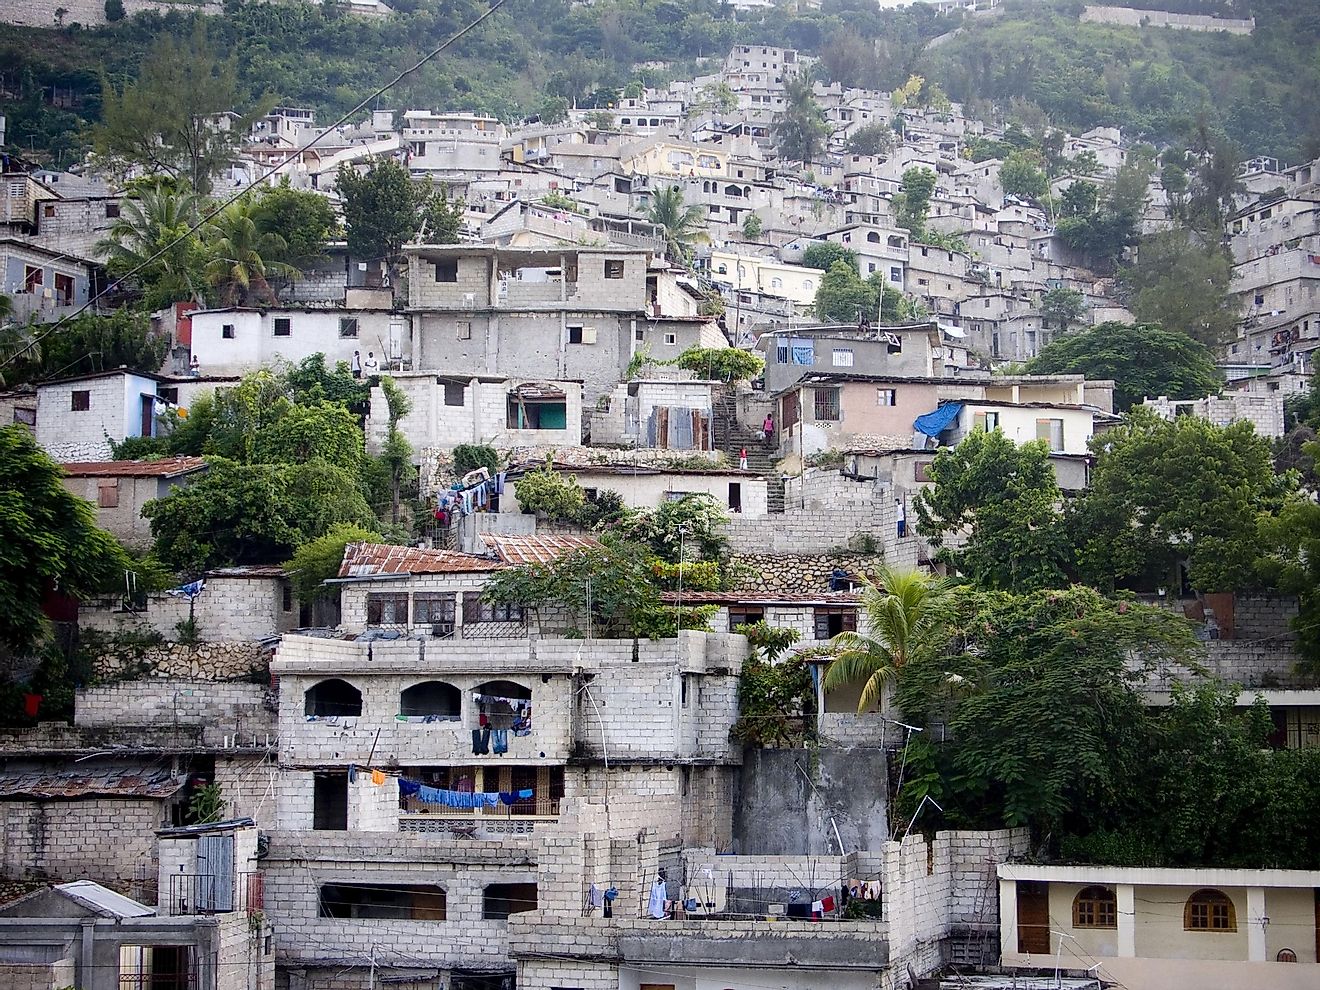 A series of anti-government demonstrations, which have regularly resulted in state violence, causes Haiti to be one of the only countries in the Americas to make the list of the worst governments worldwide.